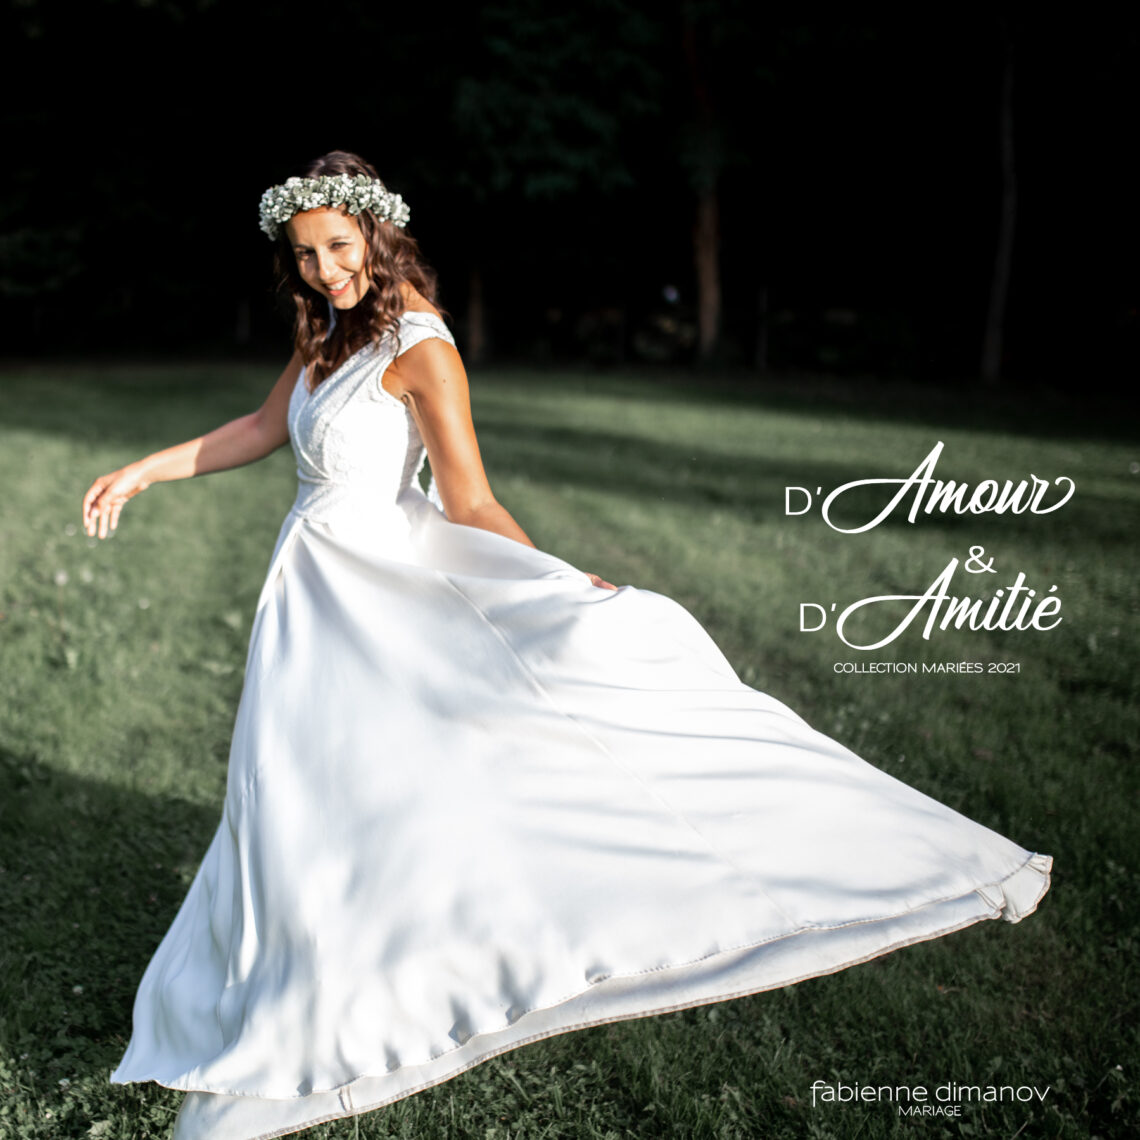 D'AMOUR & D'AMITIE - MARIEES 2021 - Fabienne Dimanov Mariage